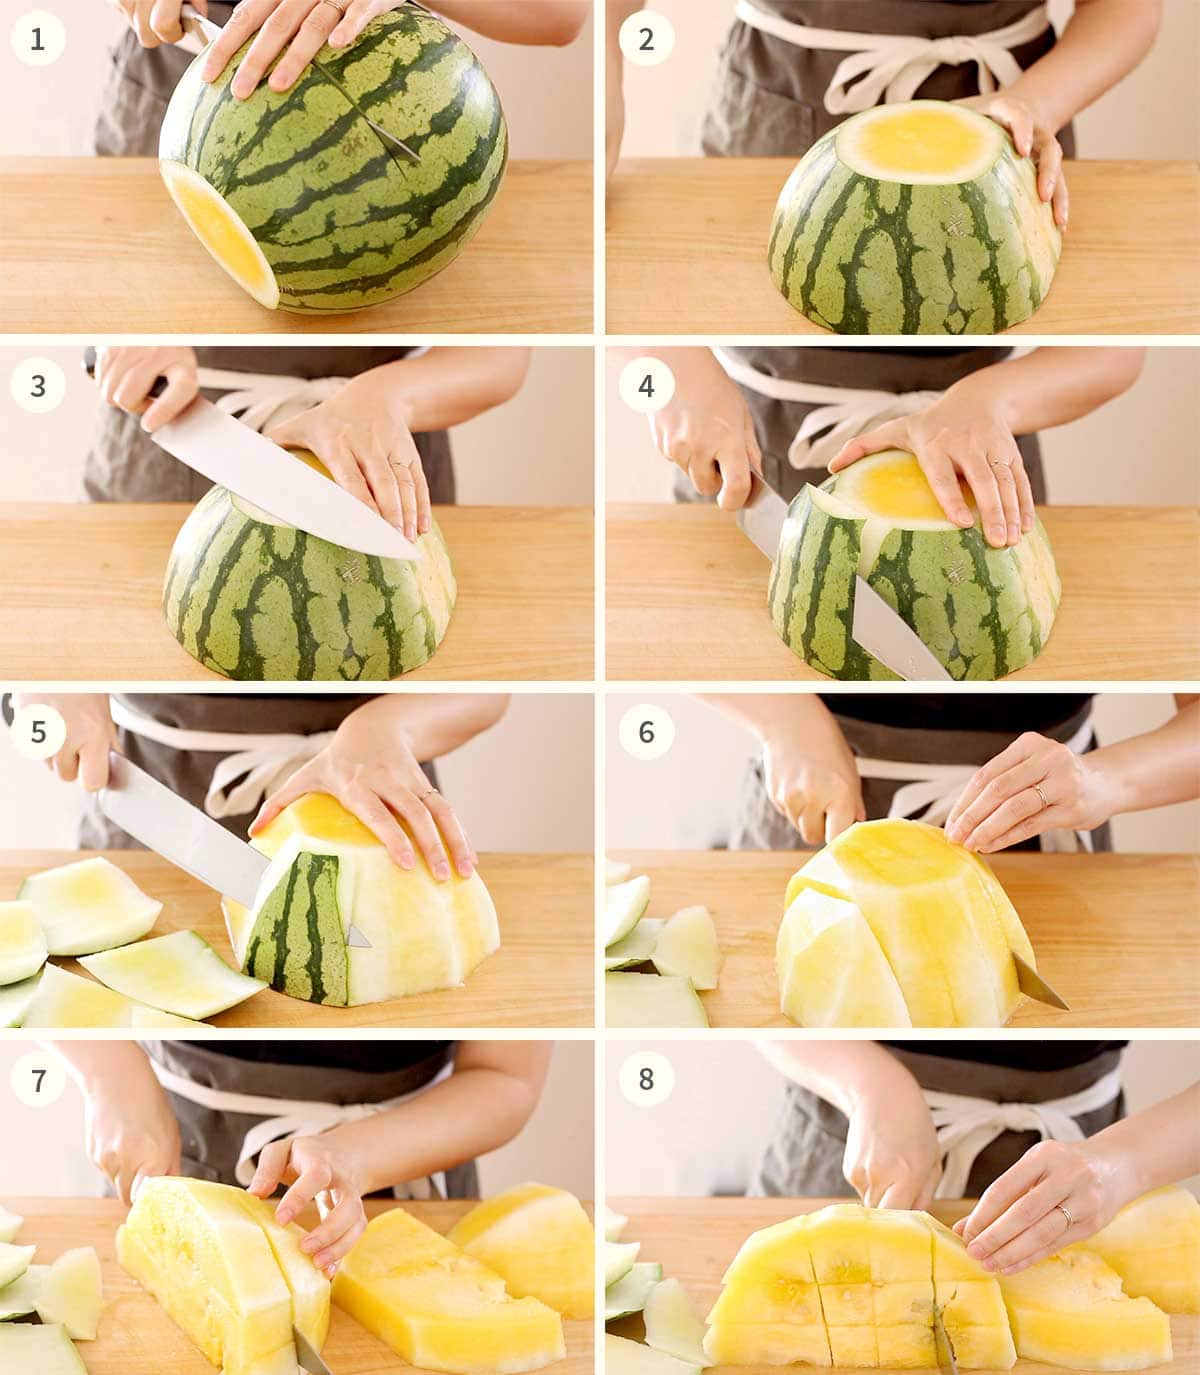 Pictures showing steps 1 through 8 on how to easily cut a watermelon into chunks.